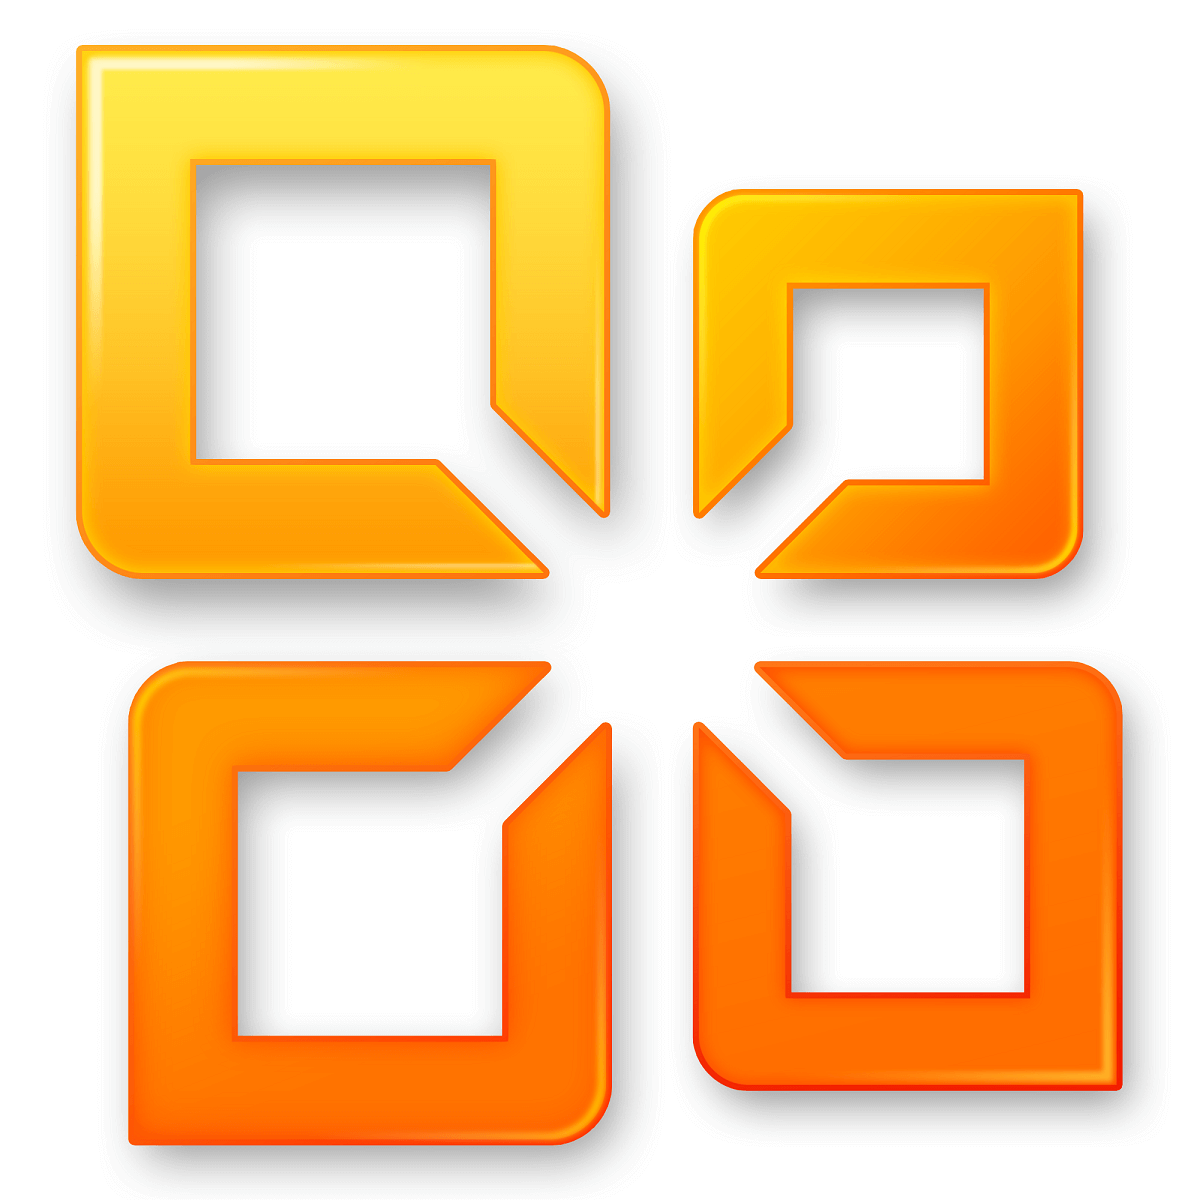 win 10 microsoft office download - Microsoft Office 64-bit is powered by the cloud so you can access your documents anytime